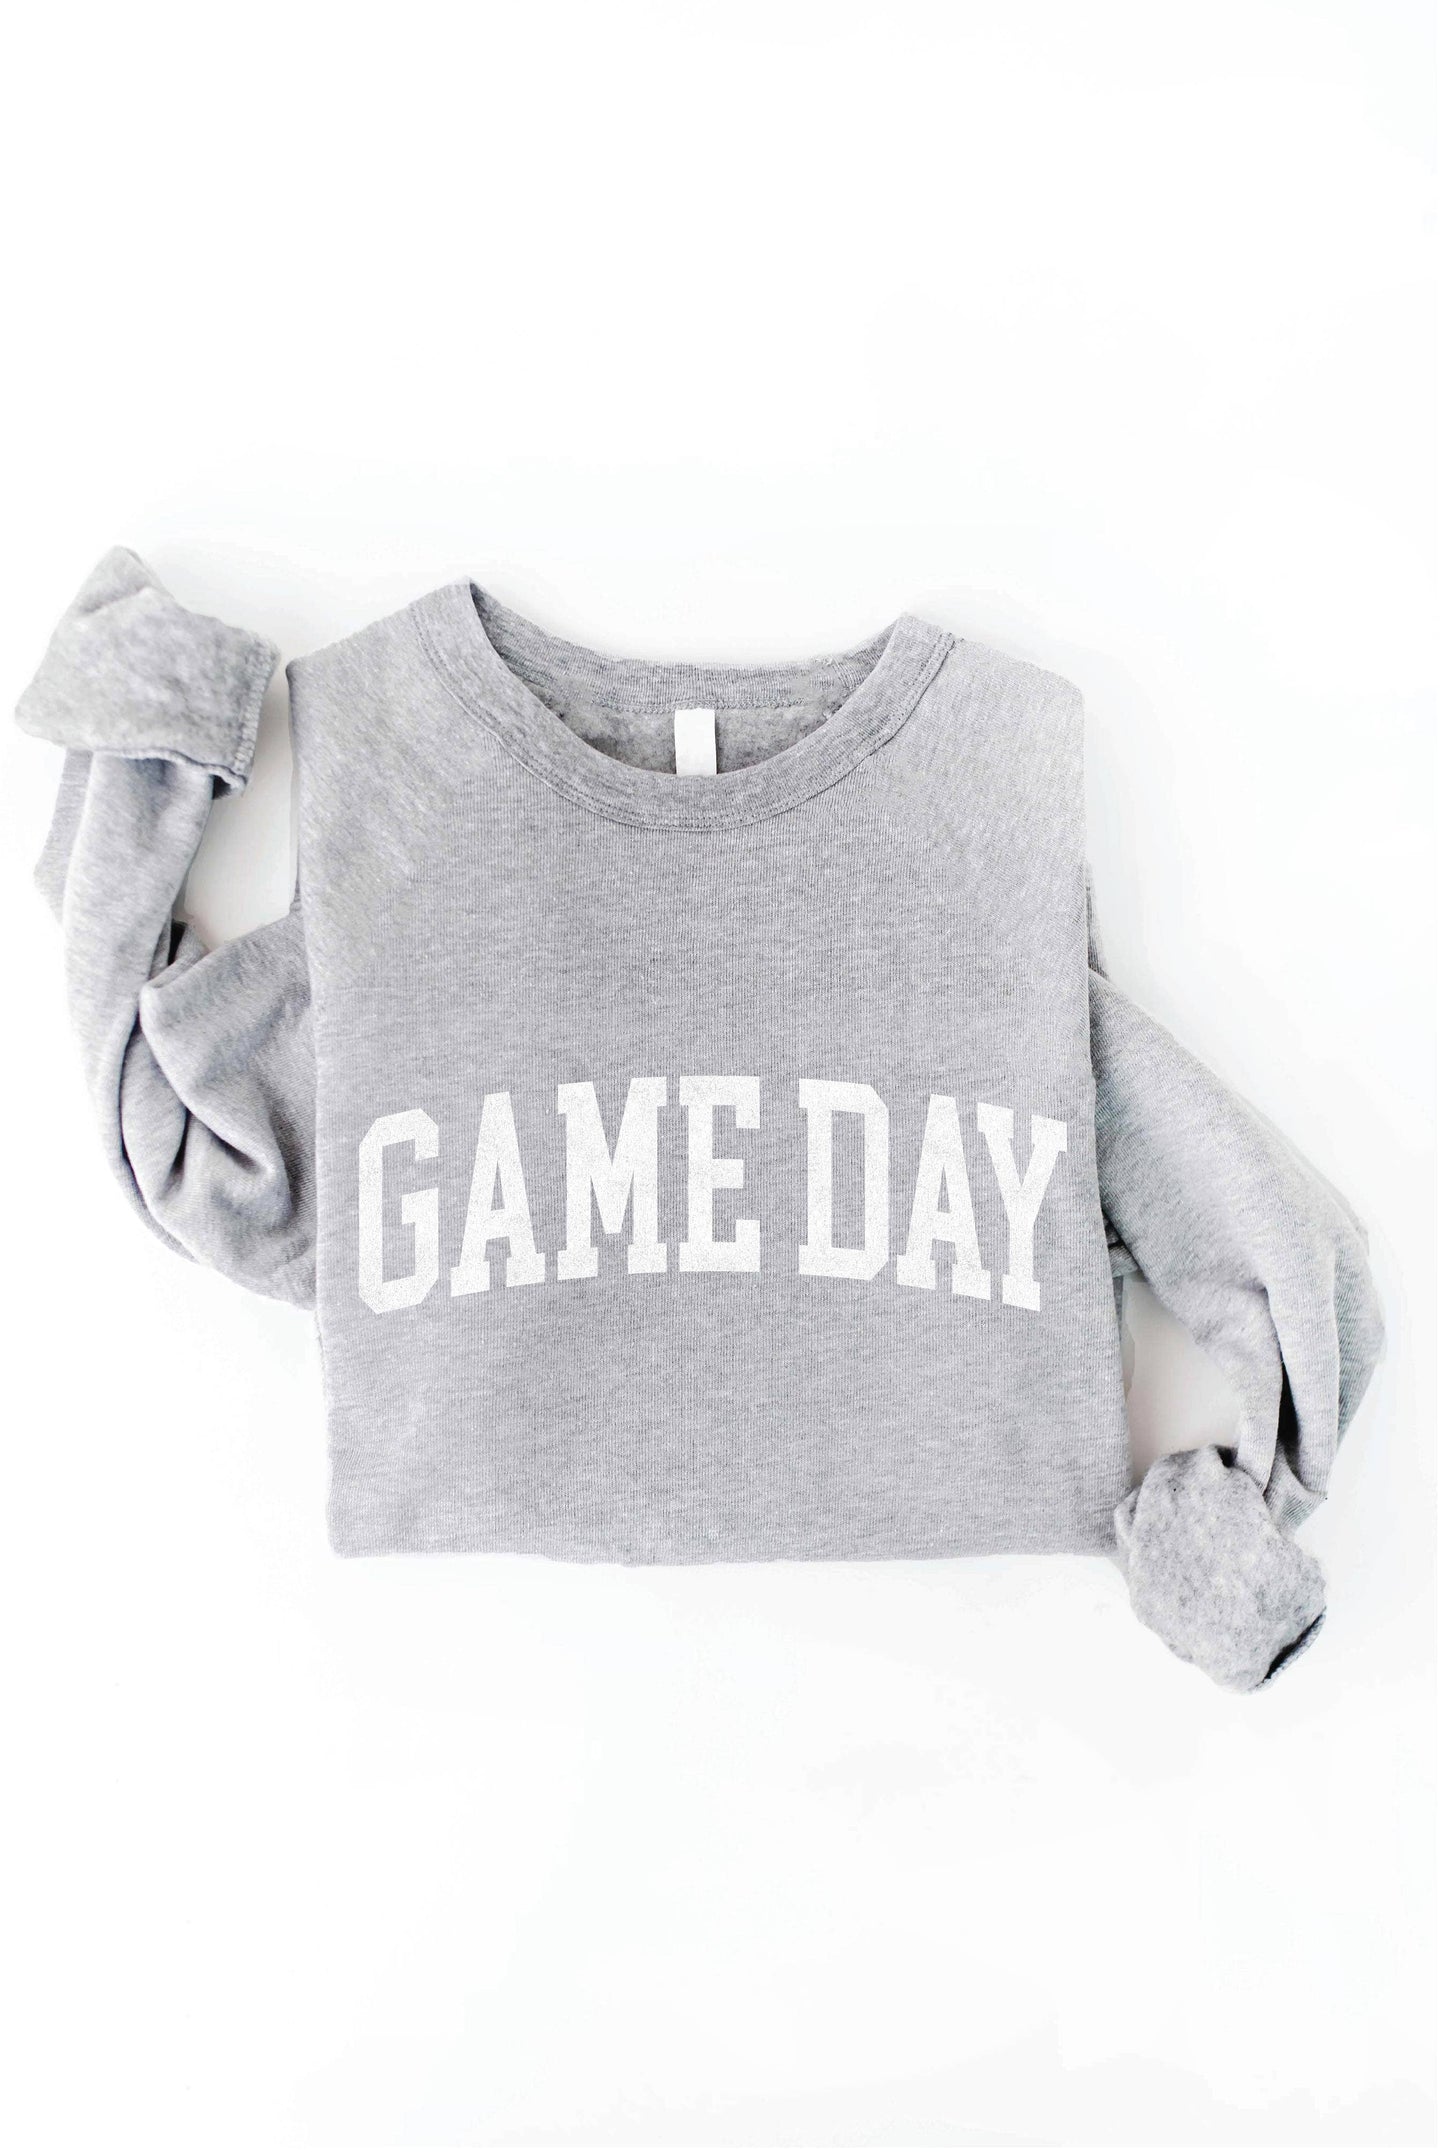 Graphic - Game Day in Athletic Heather